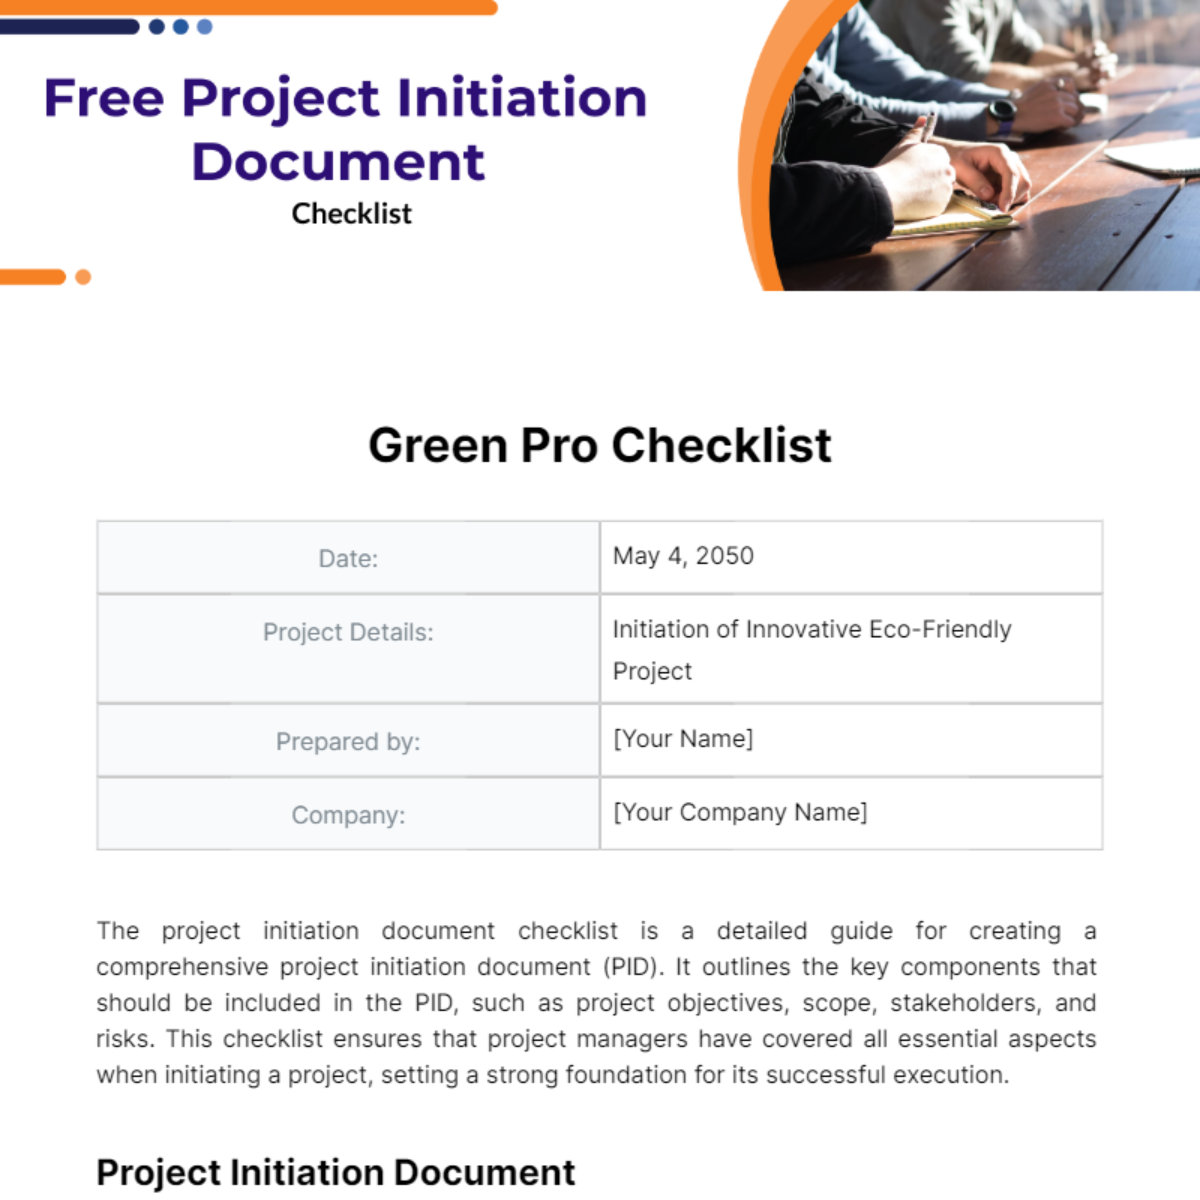 Project Initiation Document Checklist Template